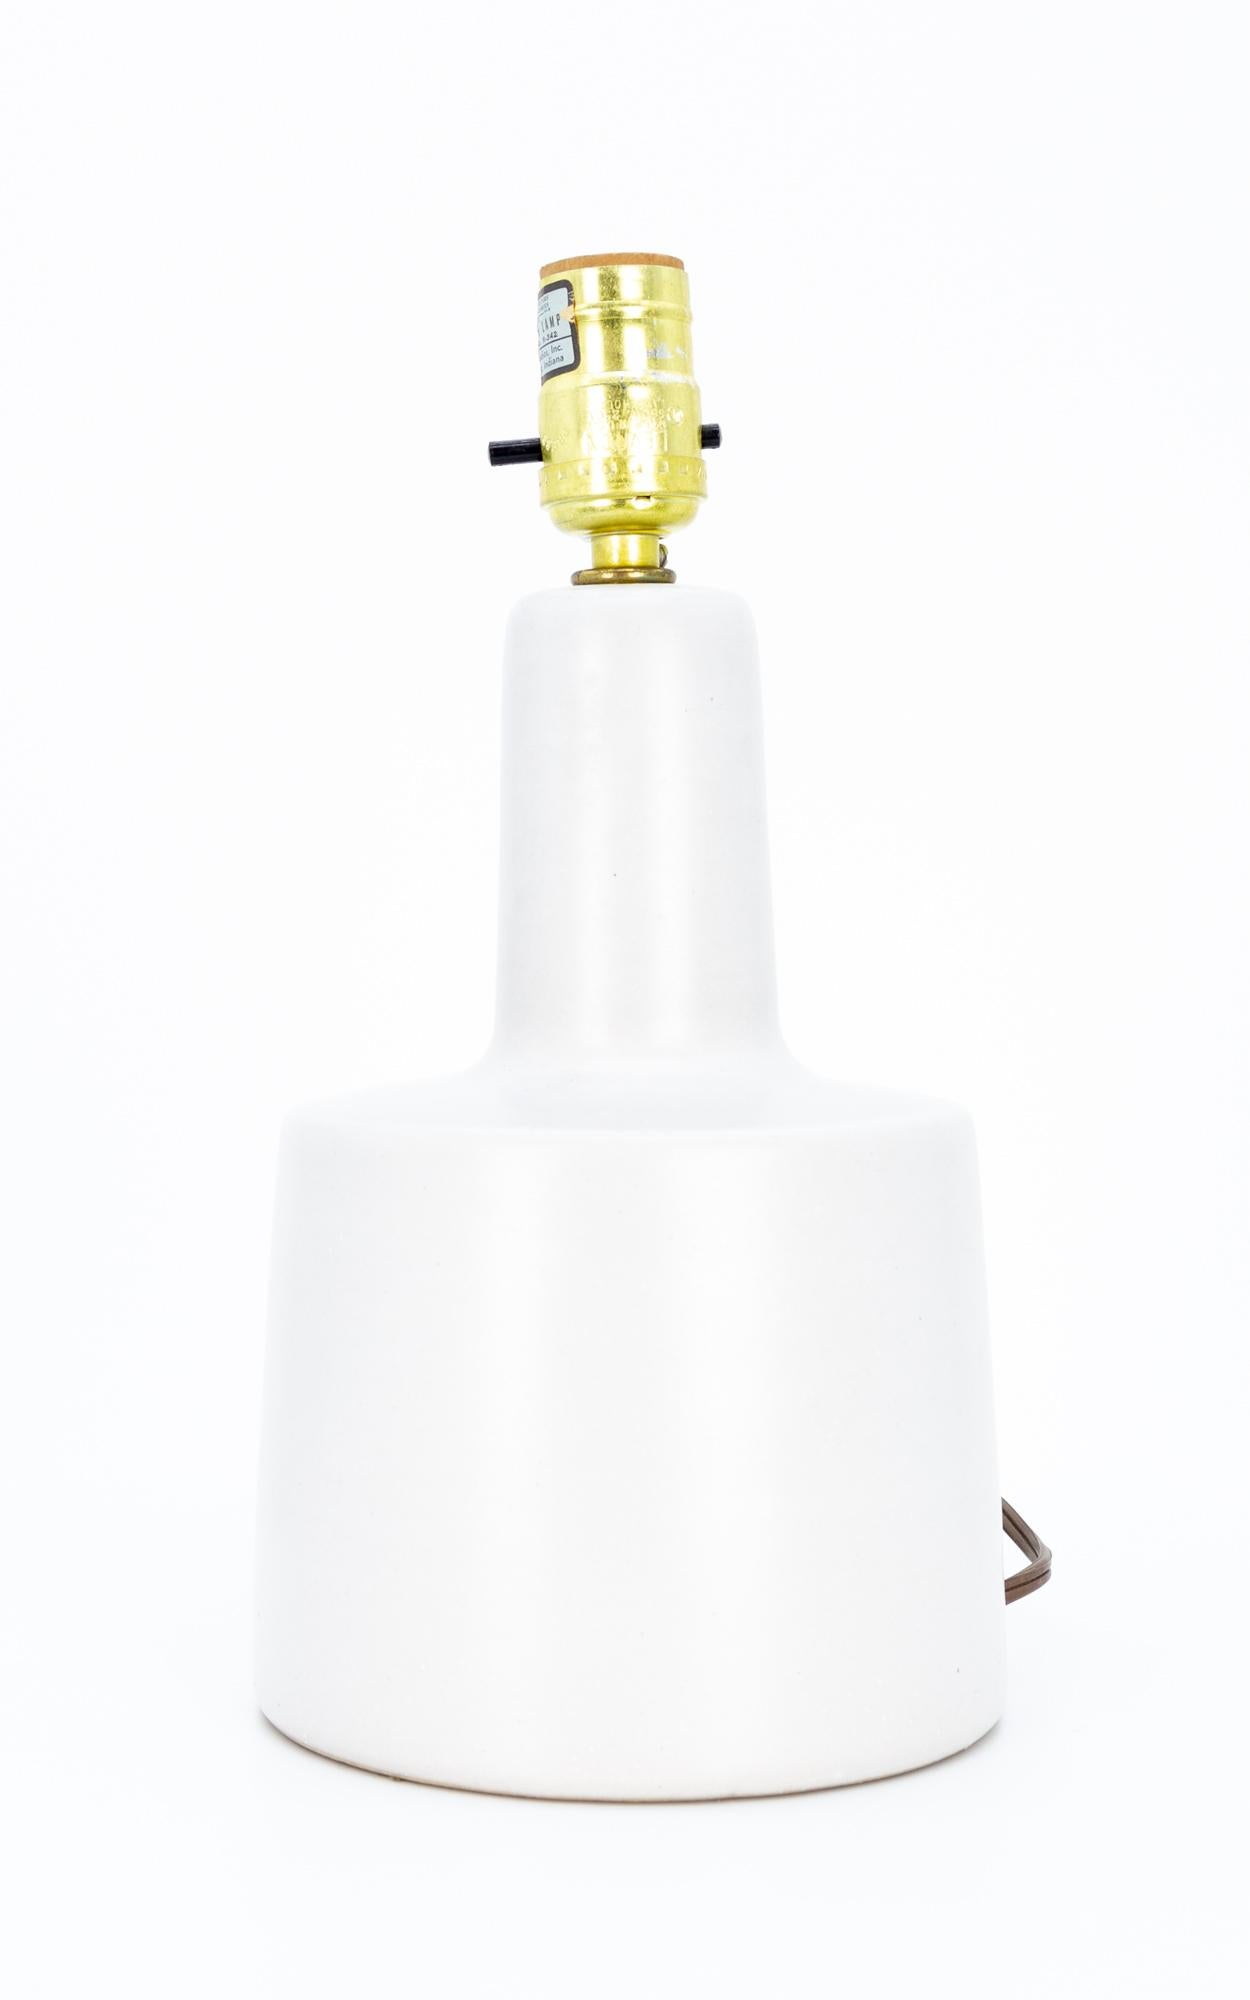 Jane & Gordon Martz mid century white ceramic lamp
This piece measures 6.5 wide x 6.5 deep x 12 inches high and weighs 3 pounds

This lamp is in excellent vintage condition.

Each piece is carefully cleaned and packaged before being shipped to